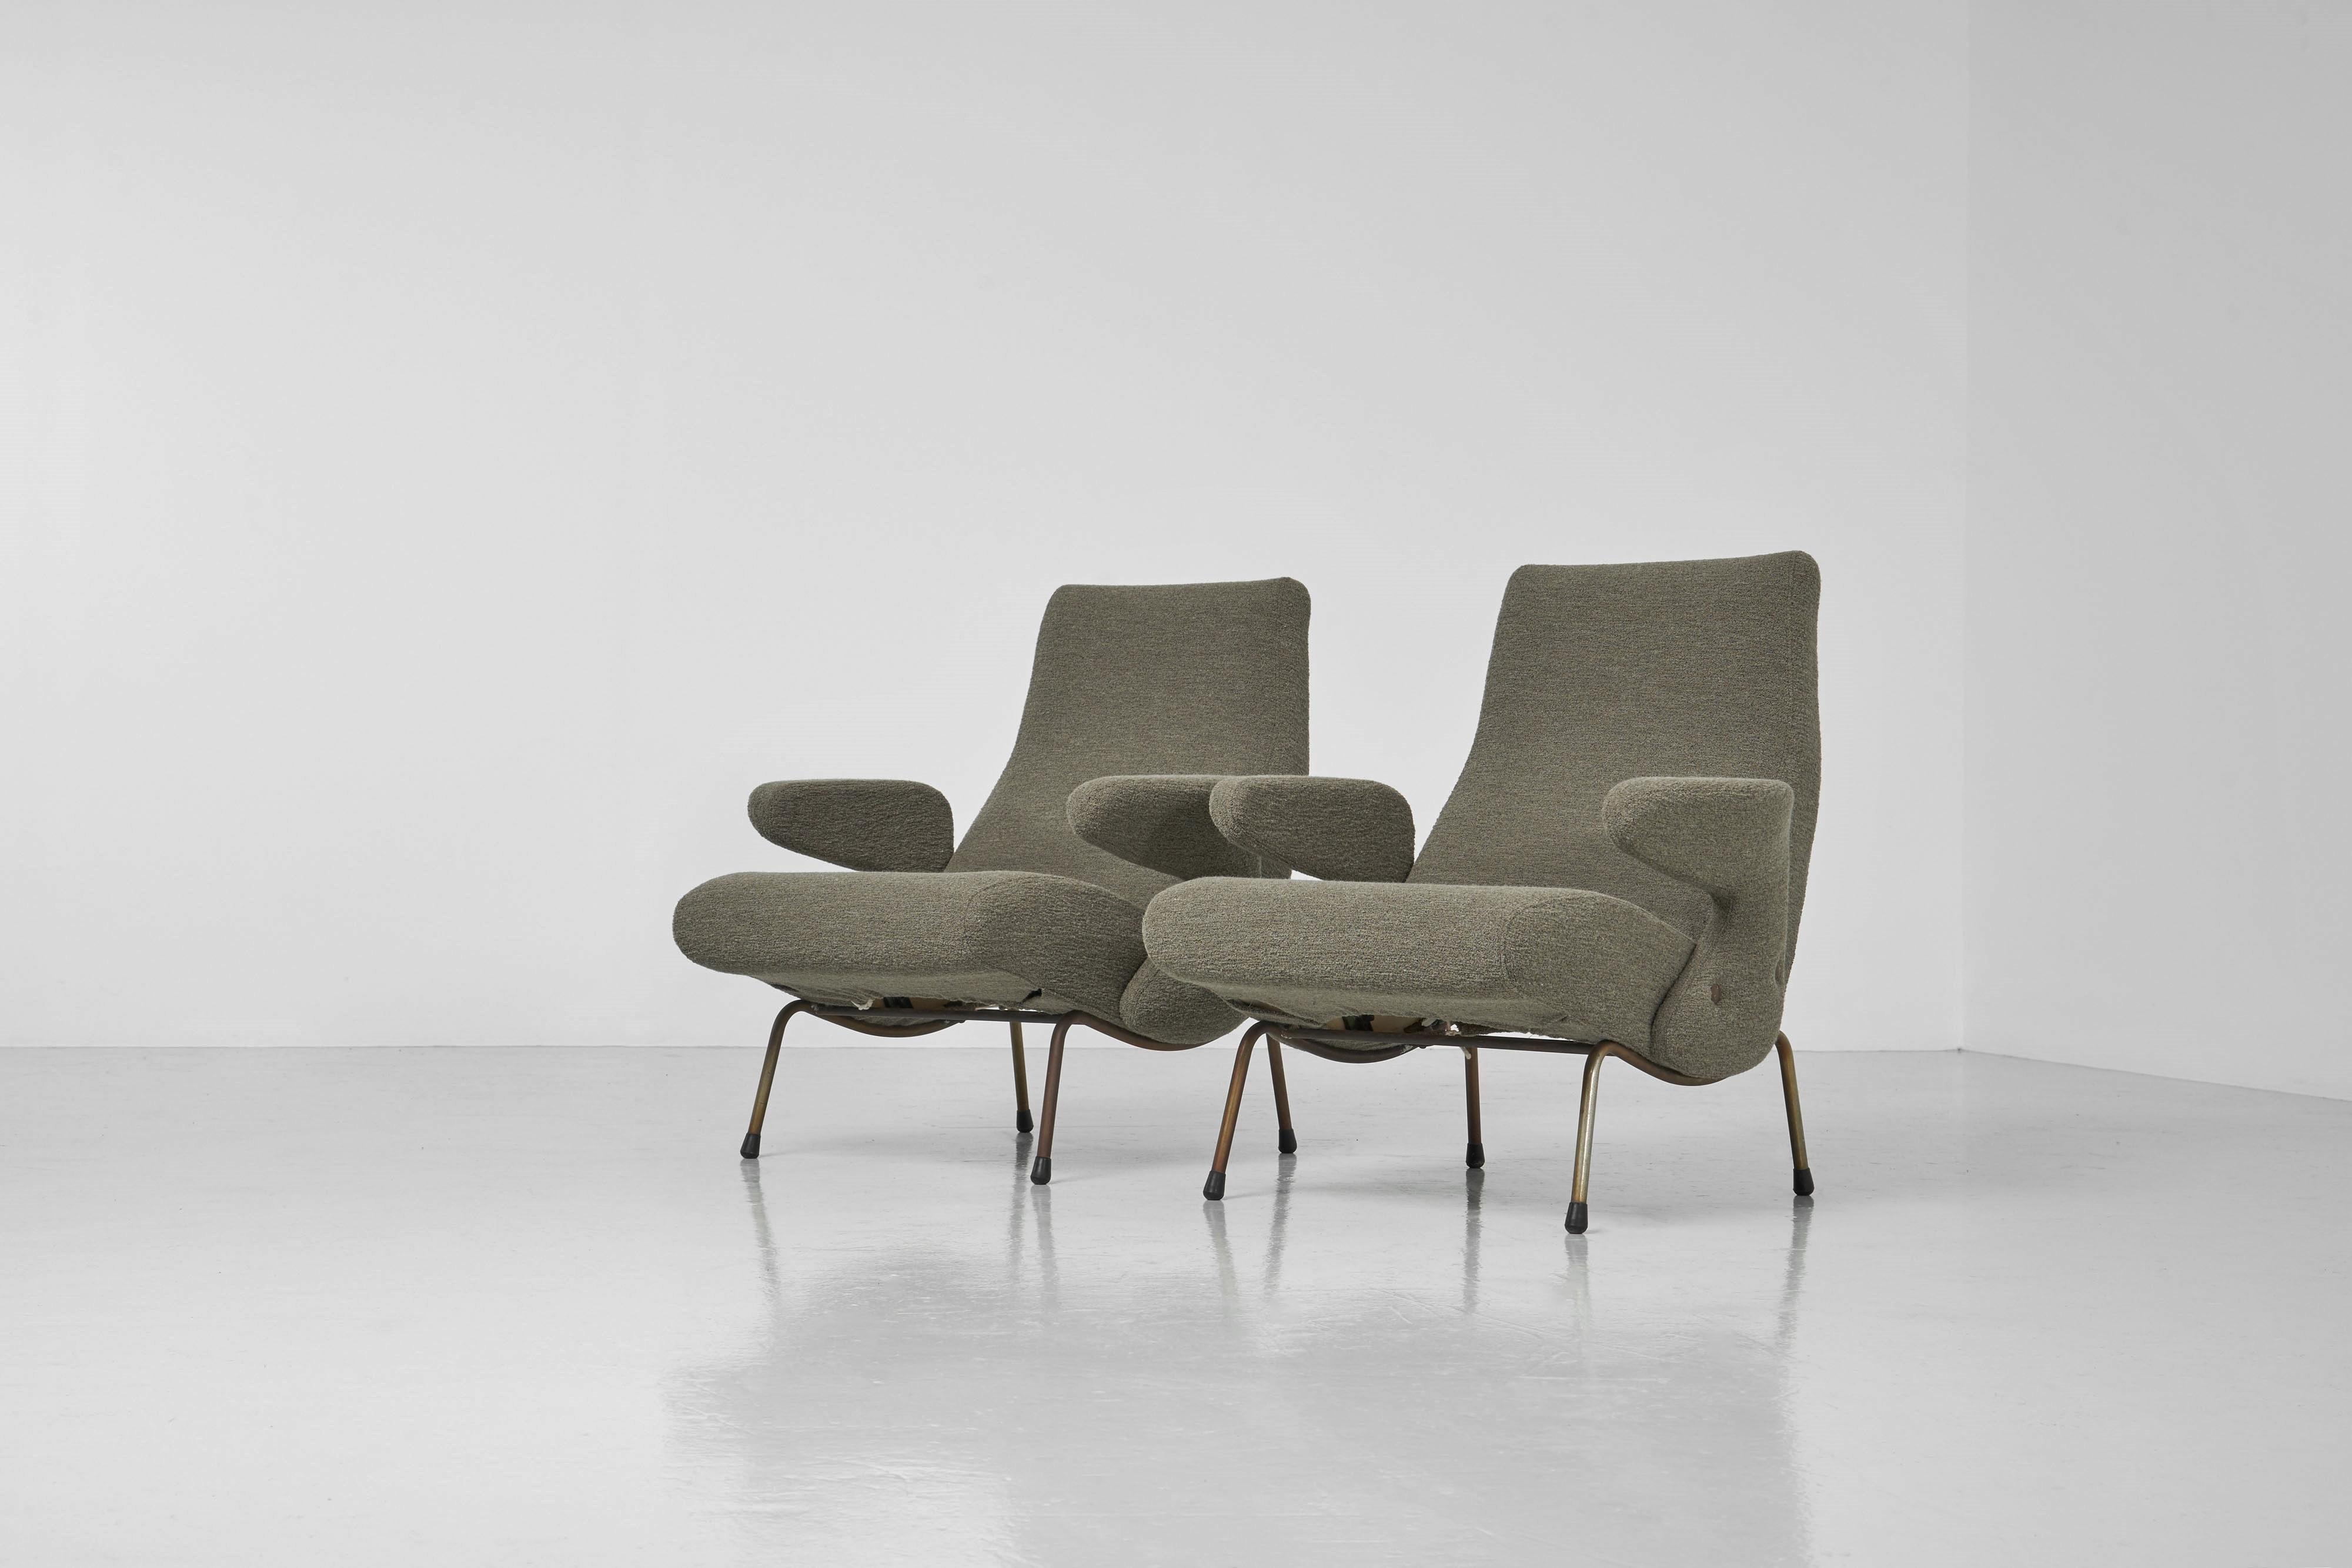 The iconic Delfino lounge chairs, designed by Erberto Carboni for Artflex in 1955, stand as iconic pieces of furniture. The original early versions of these chairs showcase beautifully patinated brass feet, retaining their original shape and charm.